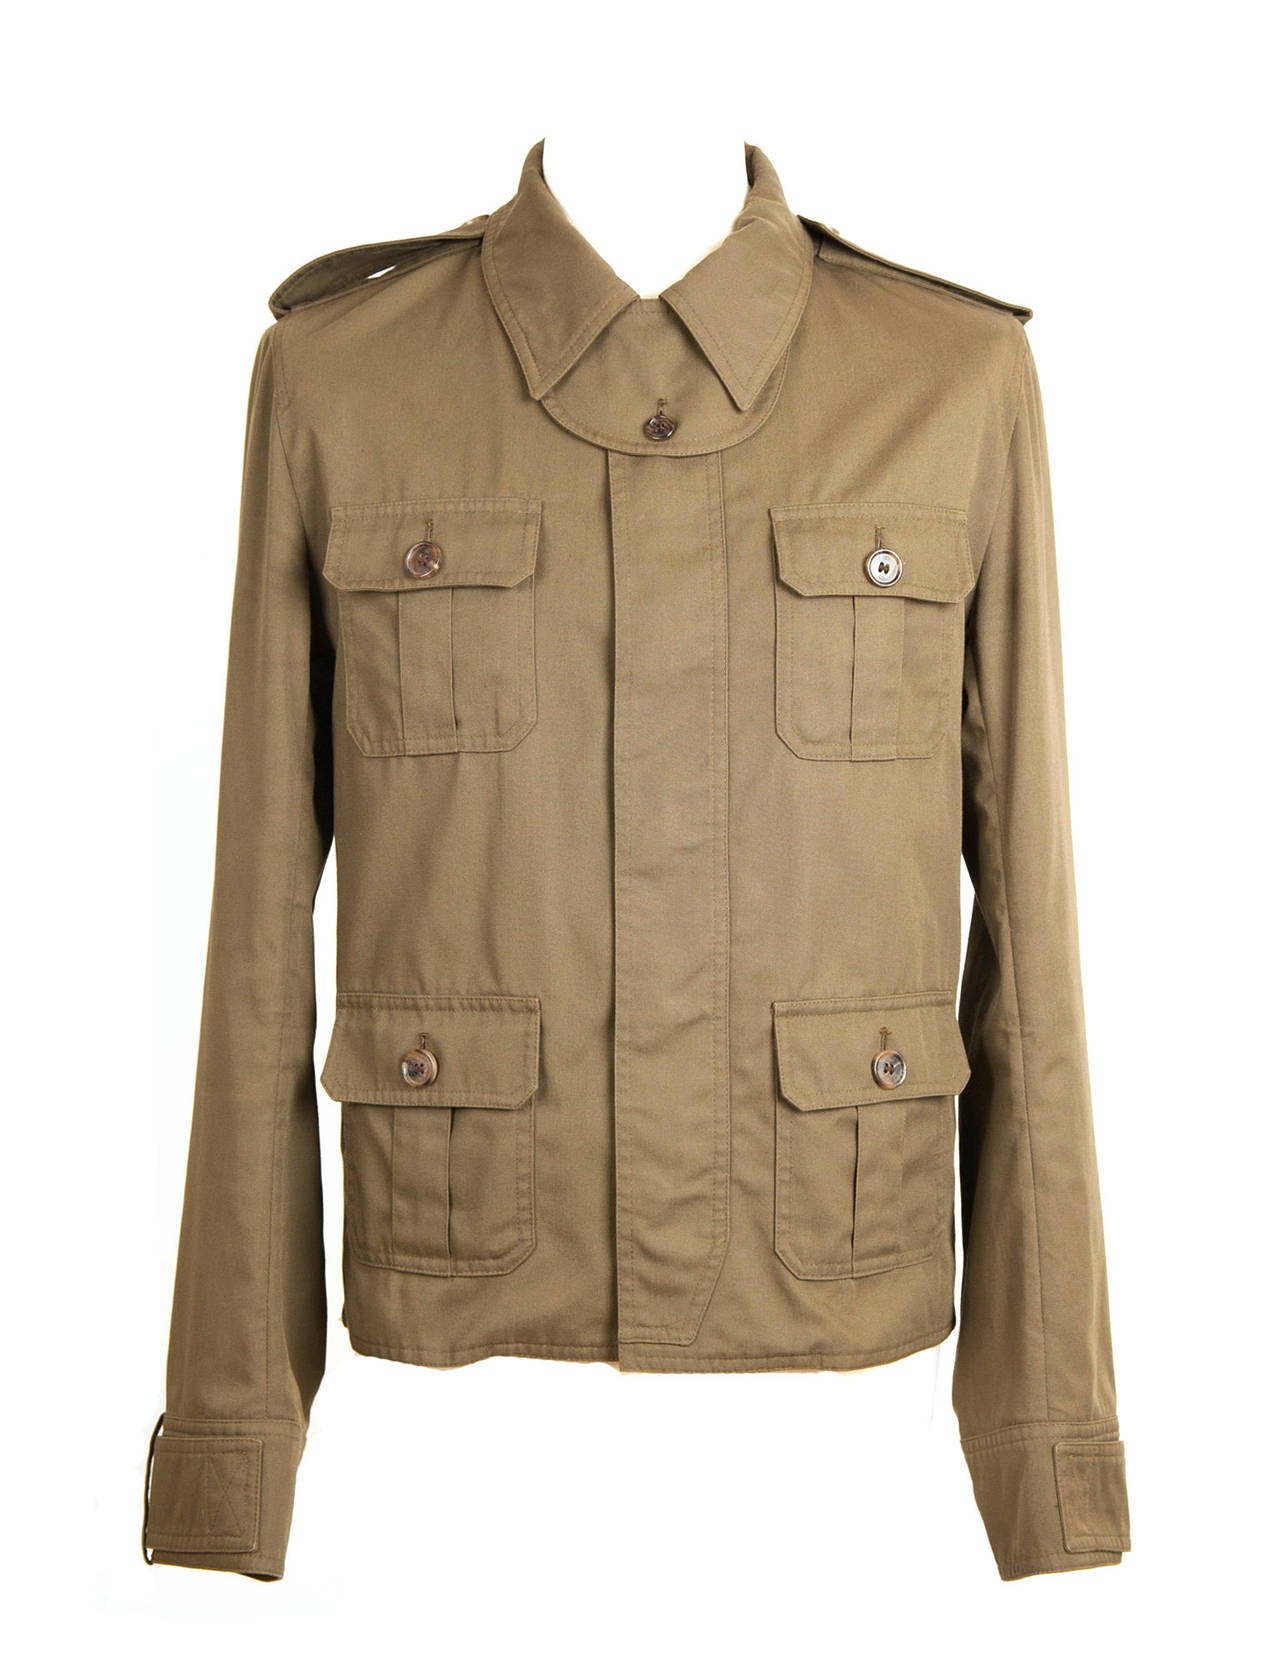 Dior Homme by Hedi Slimane khaki safari jacket from Spring 2007.  Jacket has 4 pockets in front, front removable tab at collar, back collar tab detail, epaulets, and cuffs with belt loops and buttons. Jacket is a shorter fit coming just below waist